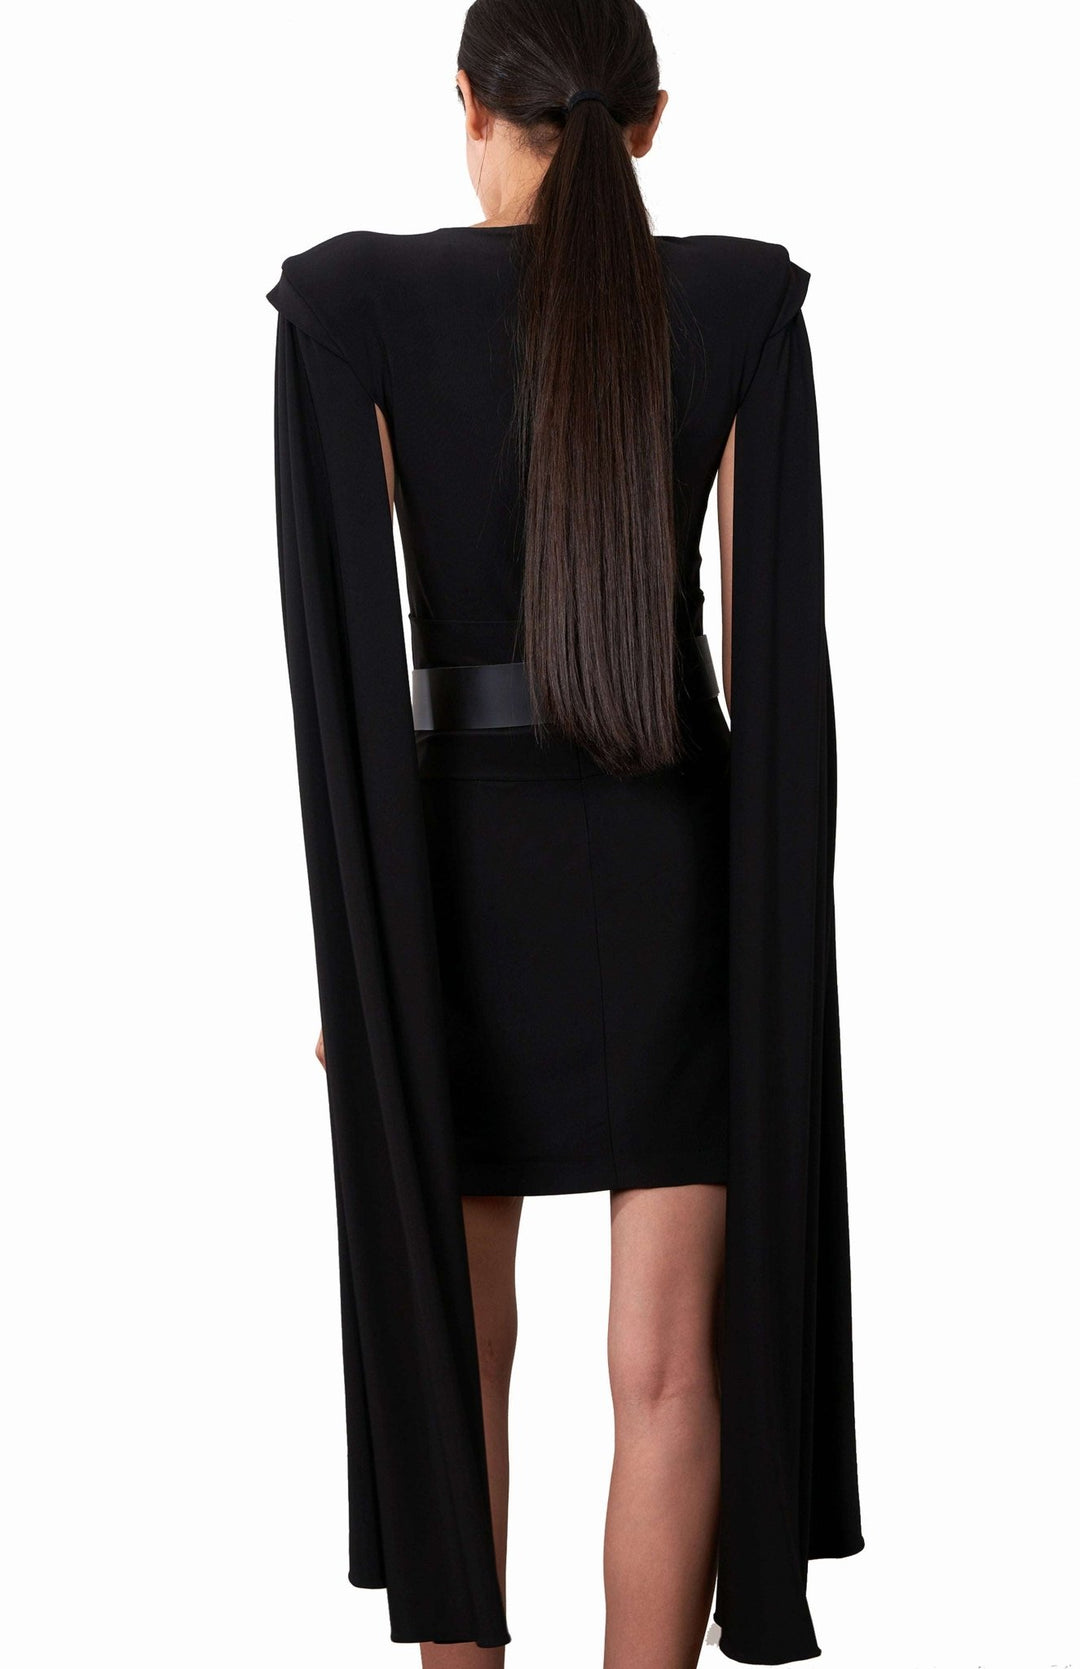  Short, black ,cape sleeve dress in jersey knit with shoulder pads and pleated detail.